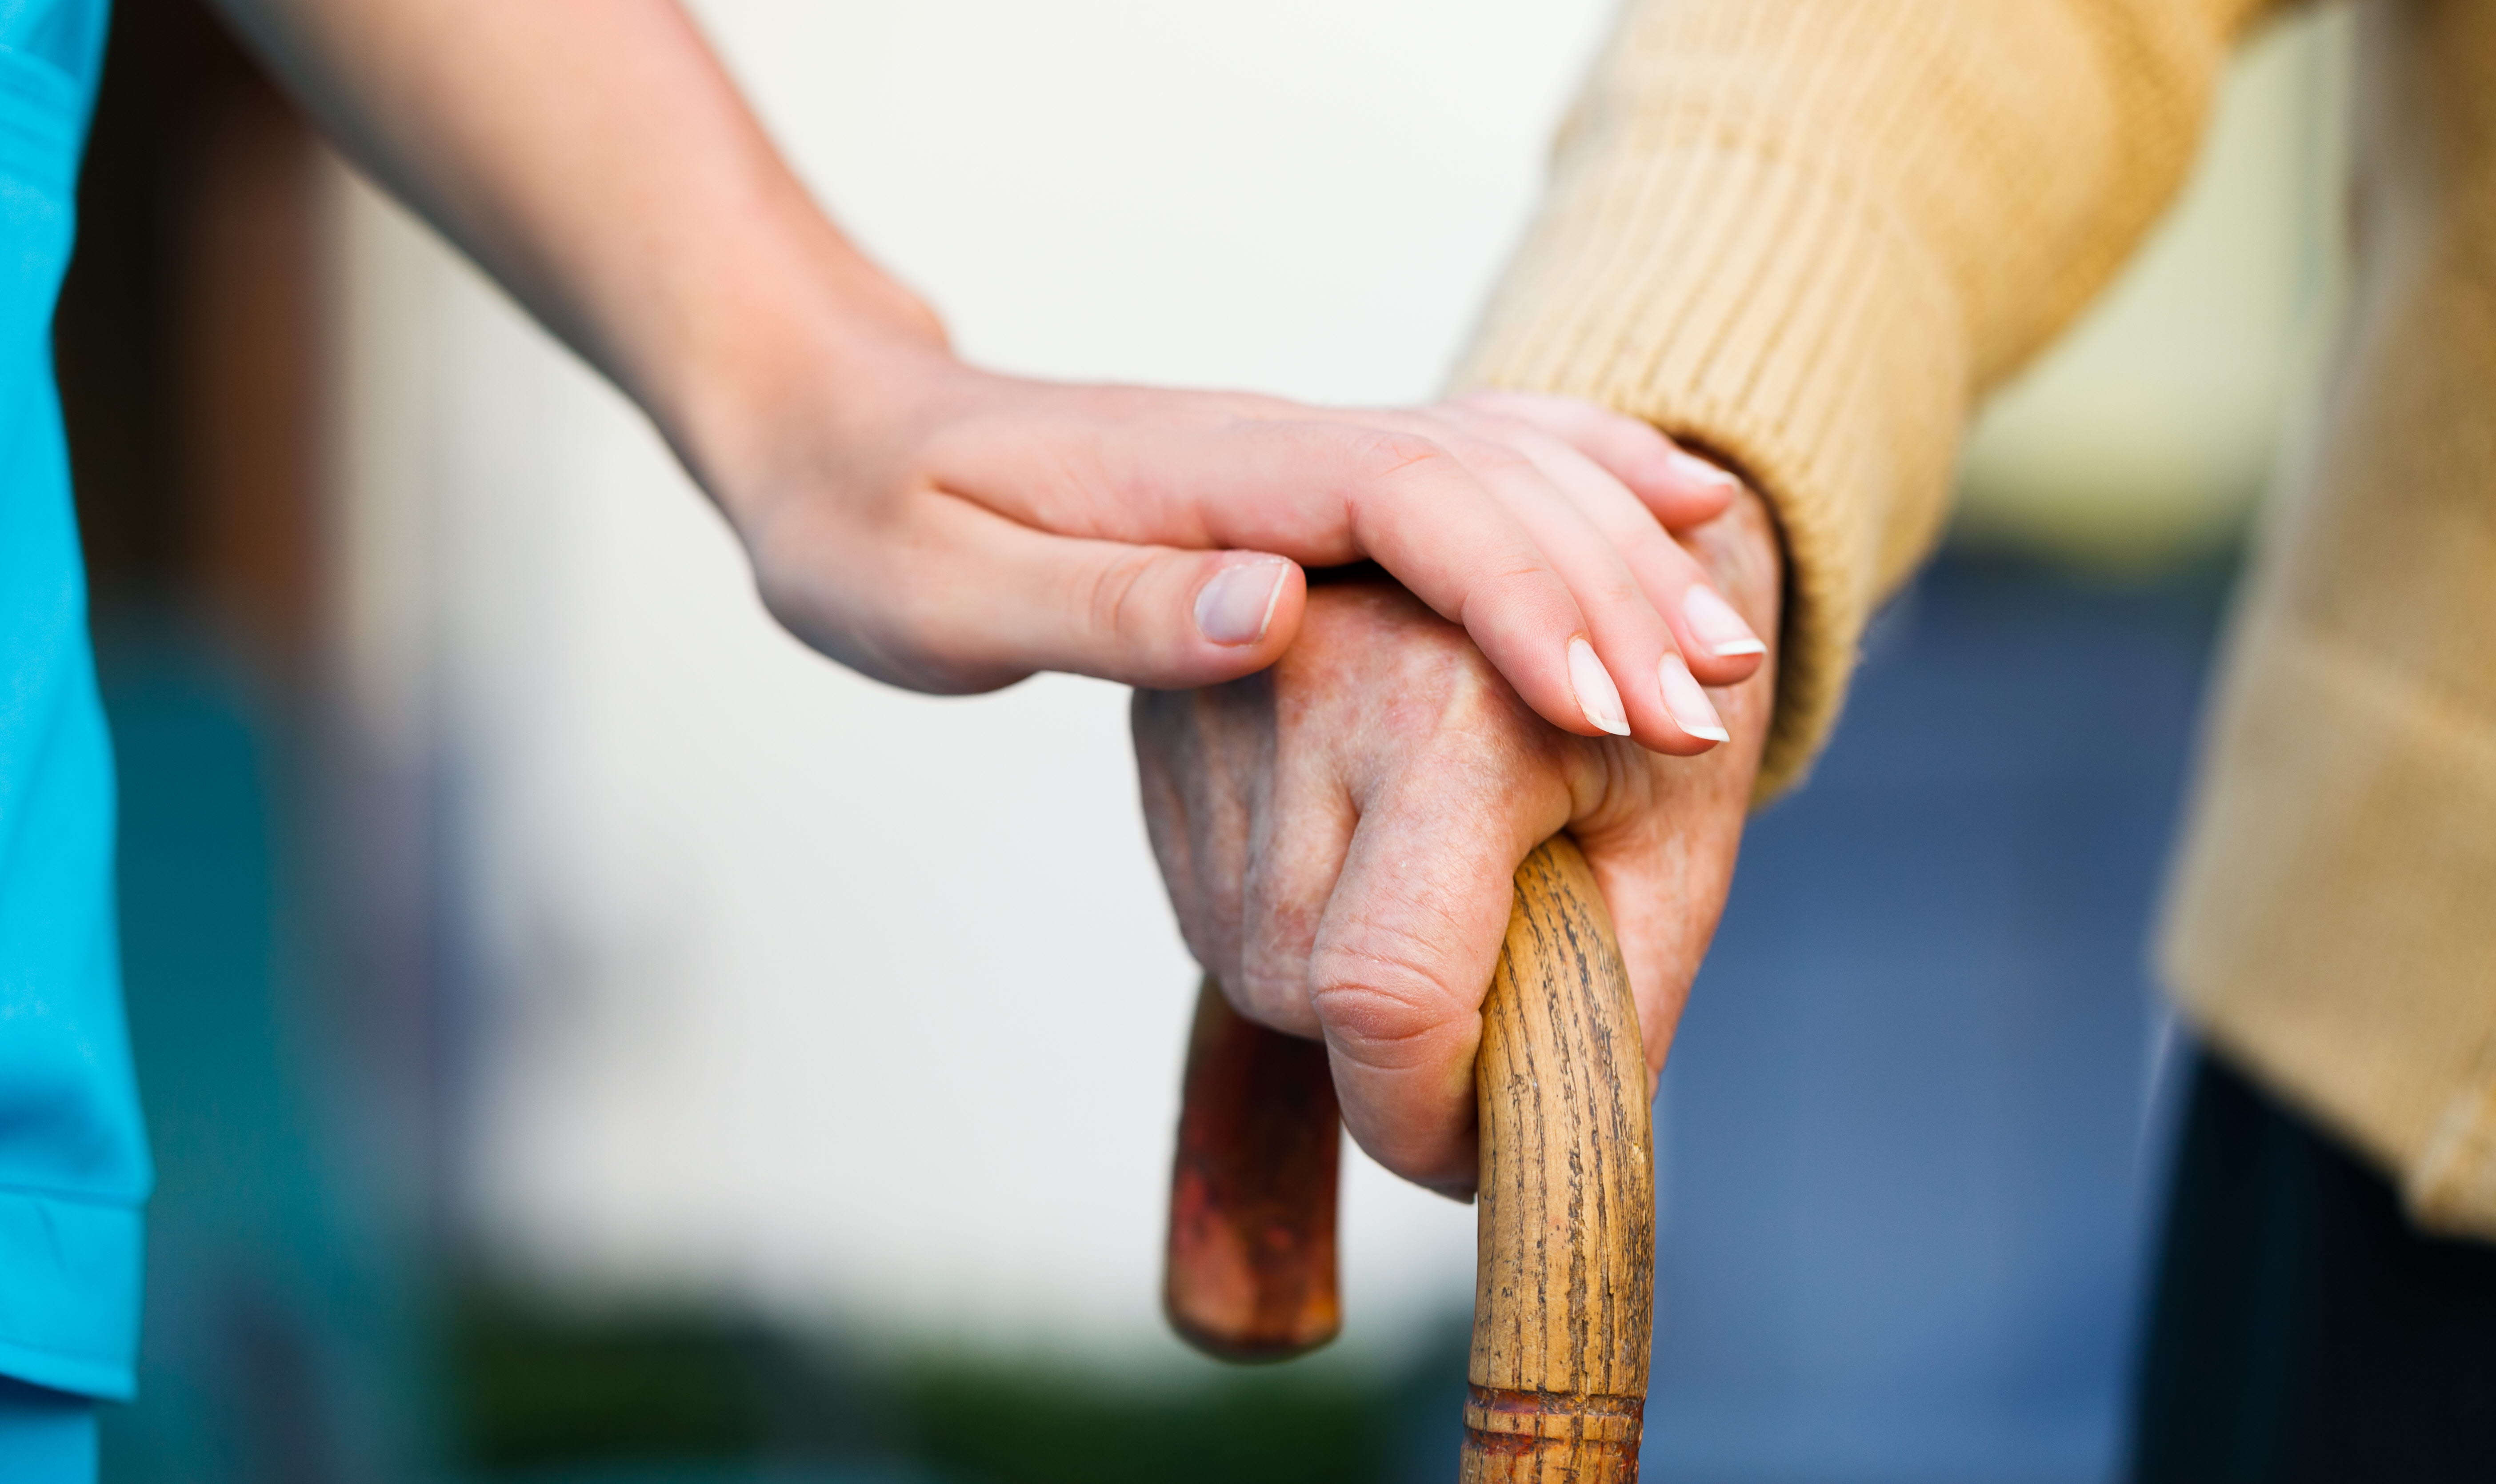 Women holding an older person's hand